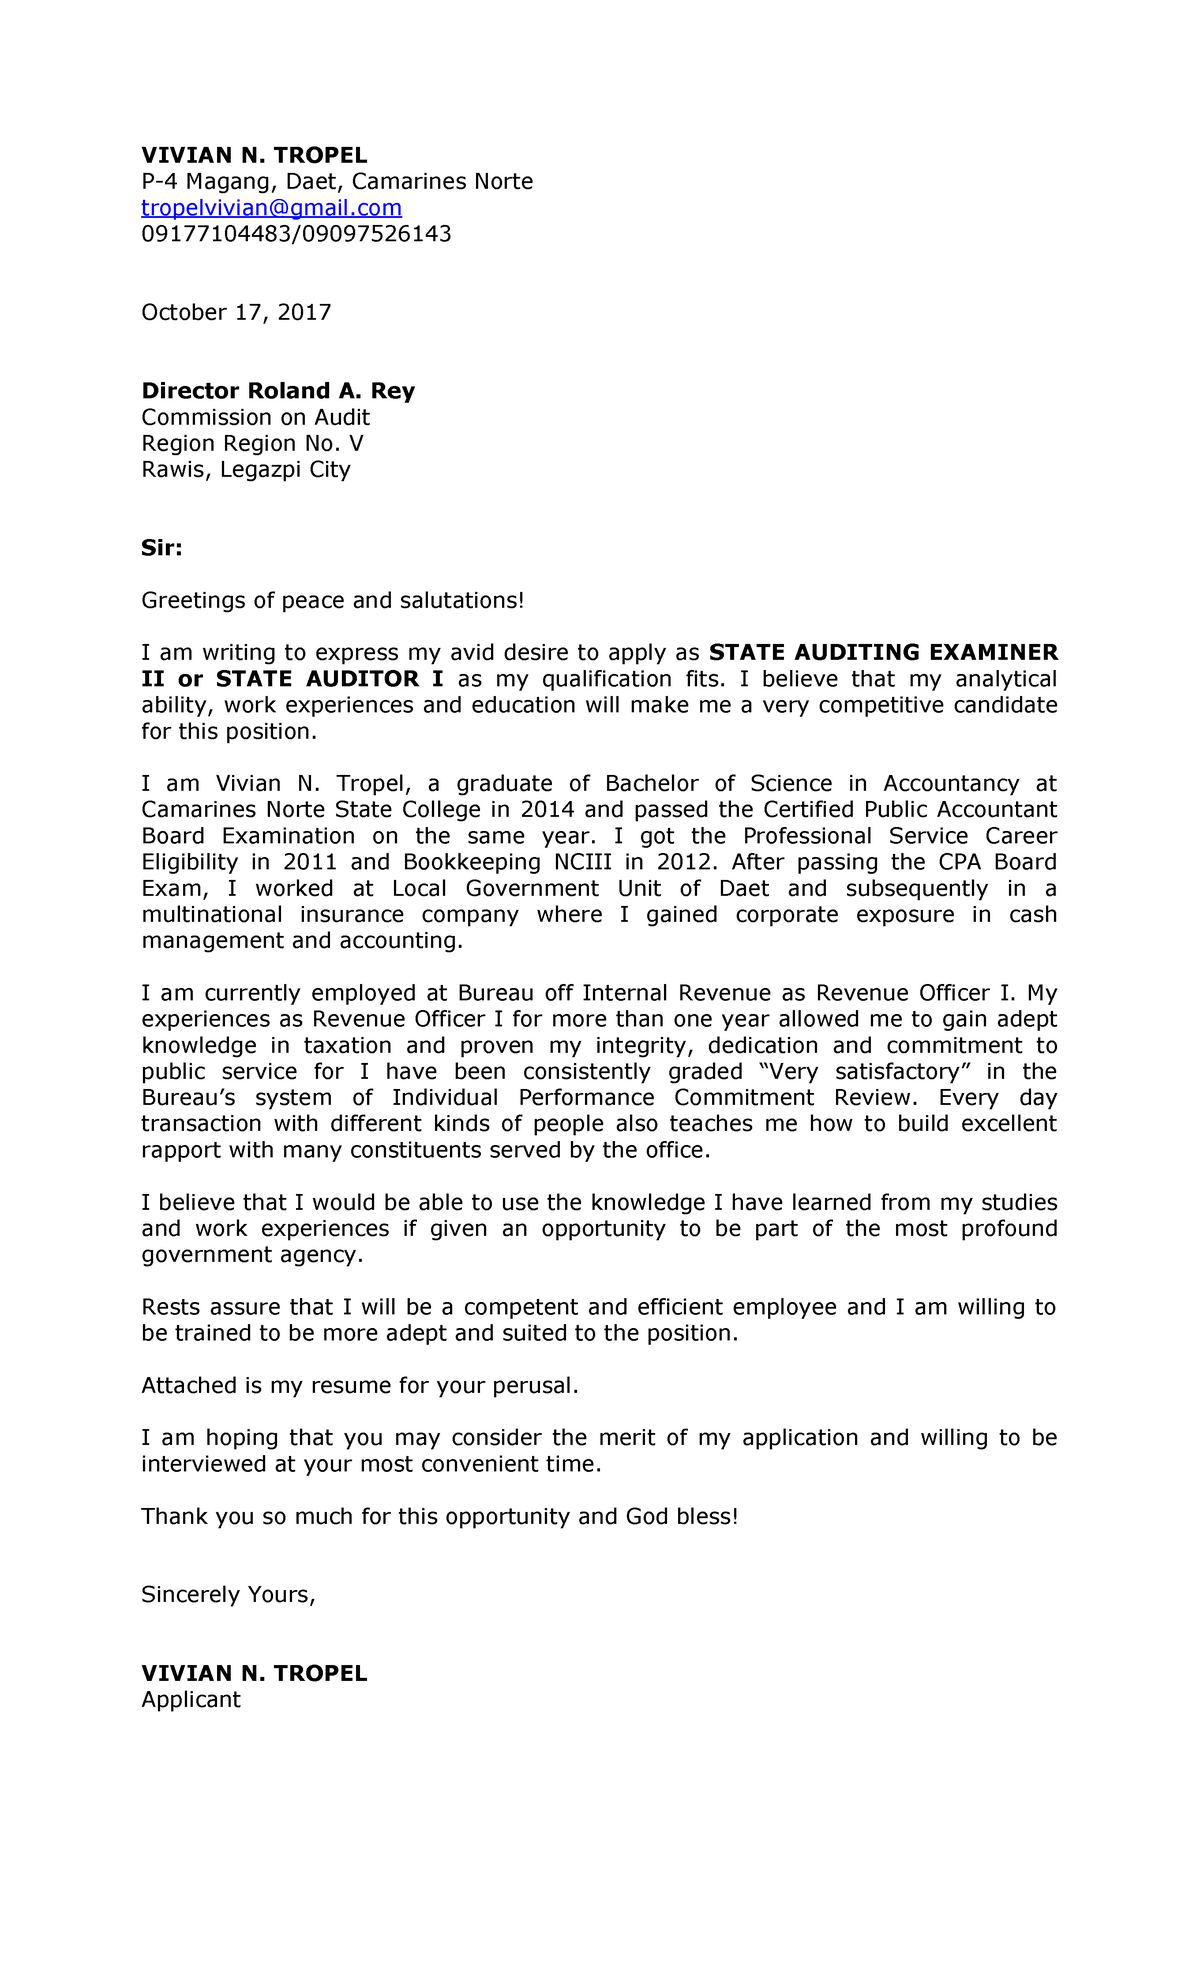 example of application letter for government employee in the philippines